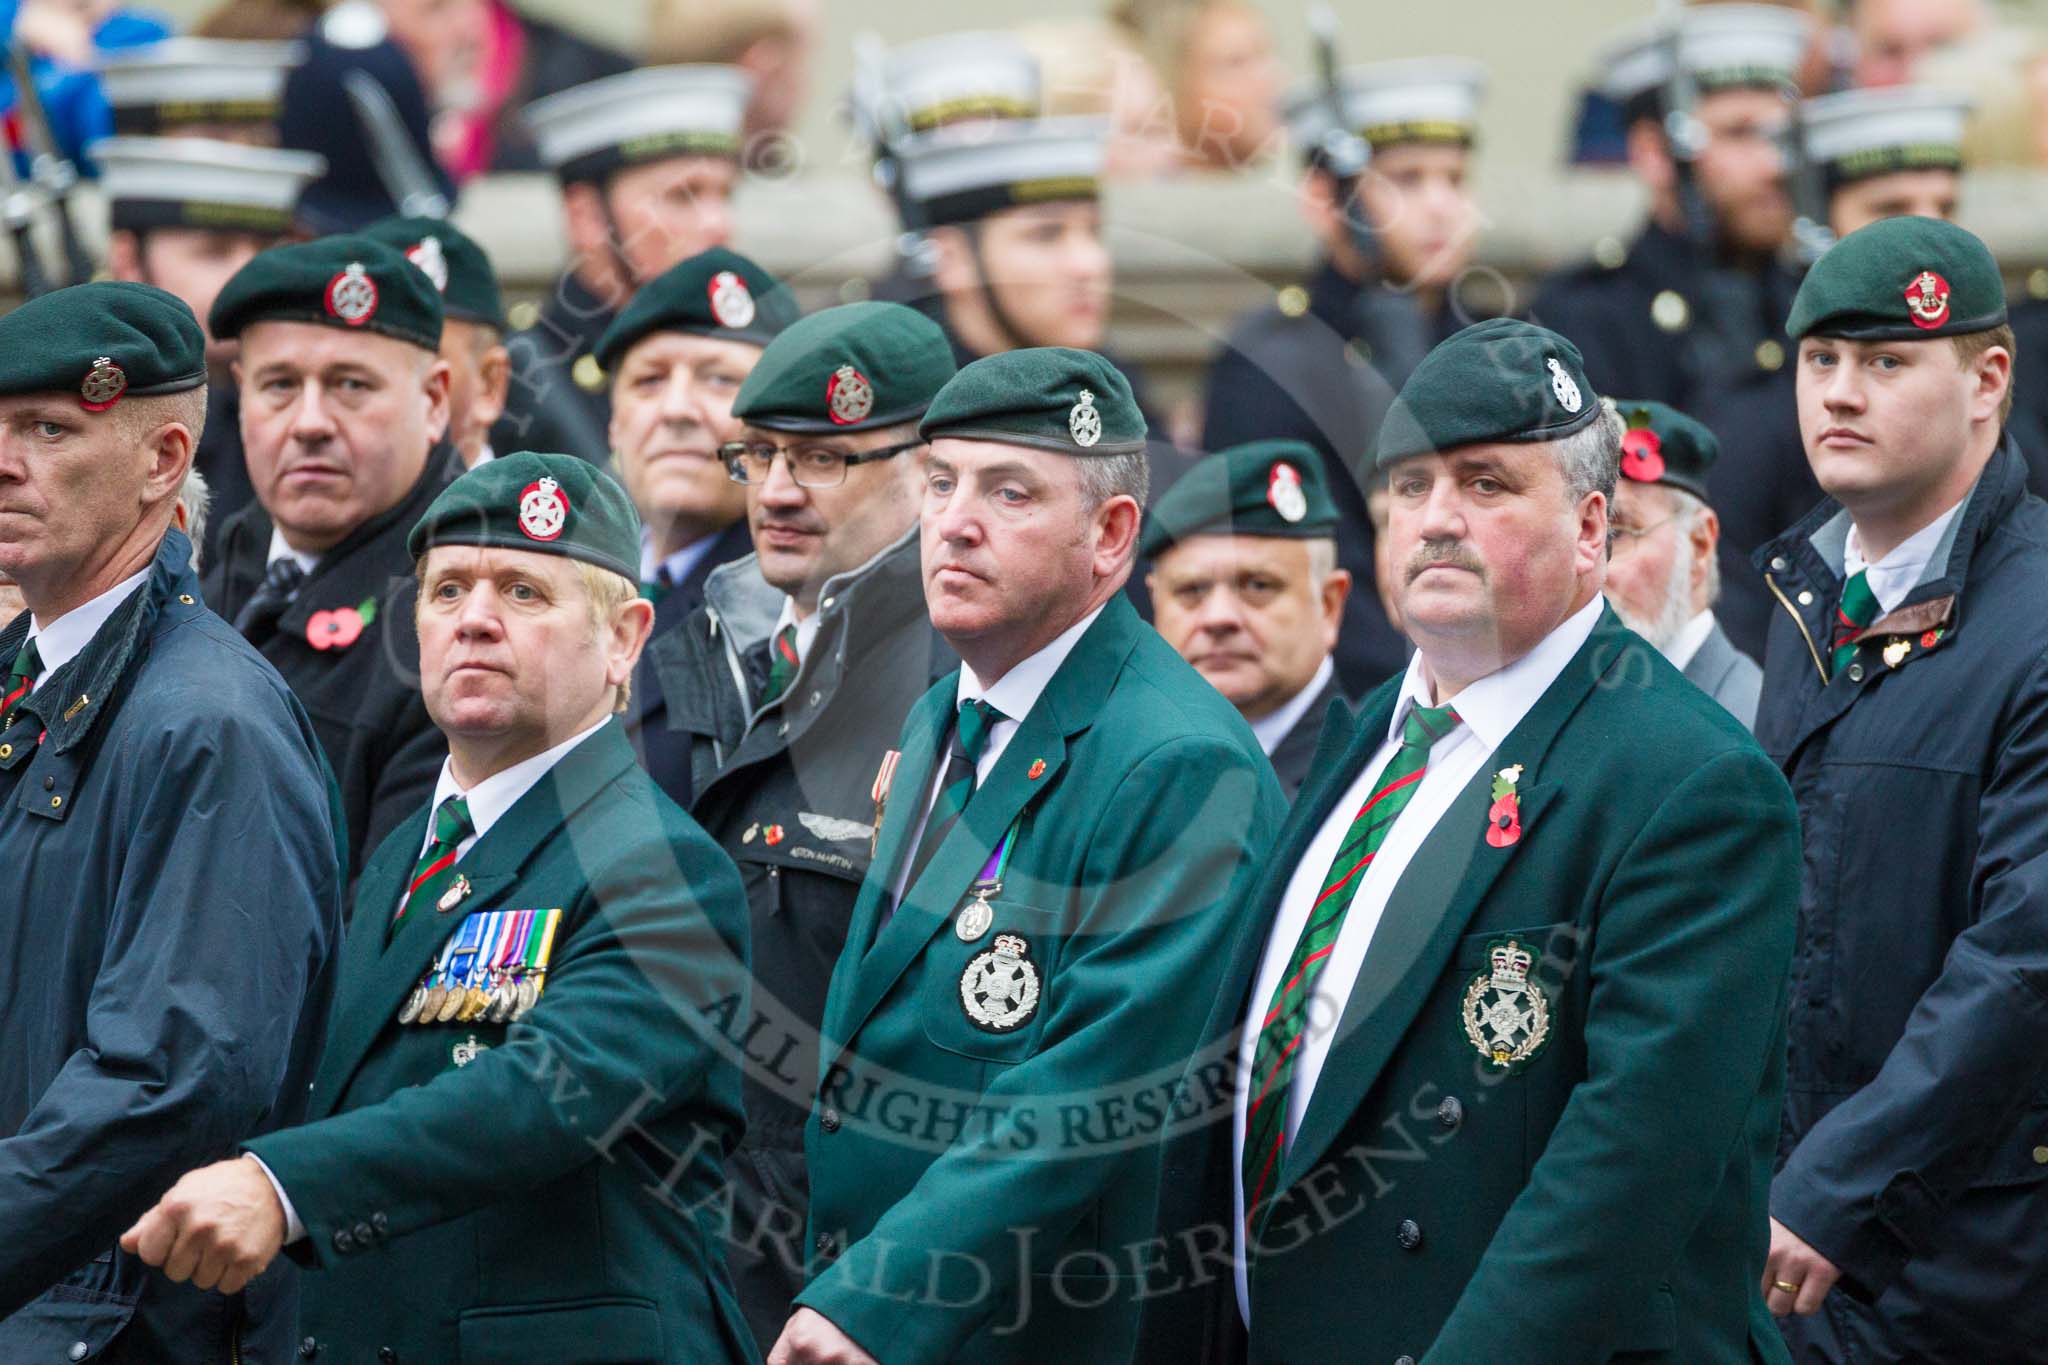 Remembrance Sunday at the Cenotaph 2015: Group A2, Royal Green Jackets Association.
Cenotaph, Whitehall, London SW1,
London,
Greater London,
United Kingdom,
on 08 November 2015 at 12:08, image #1177